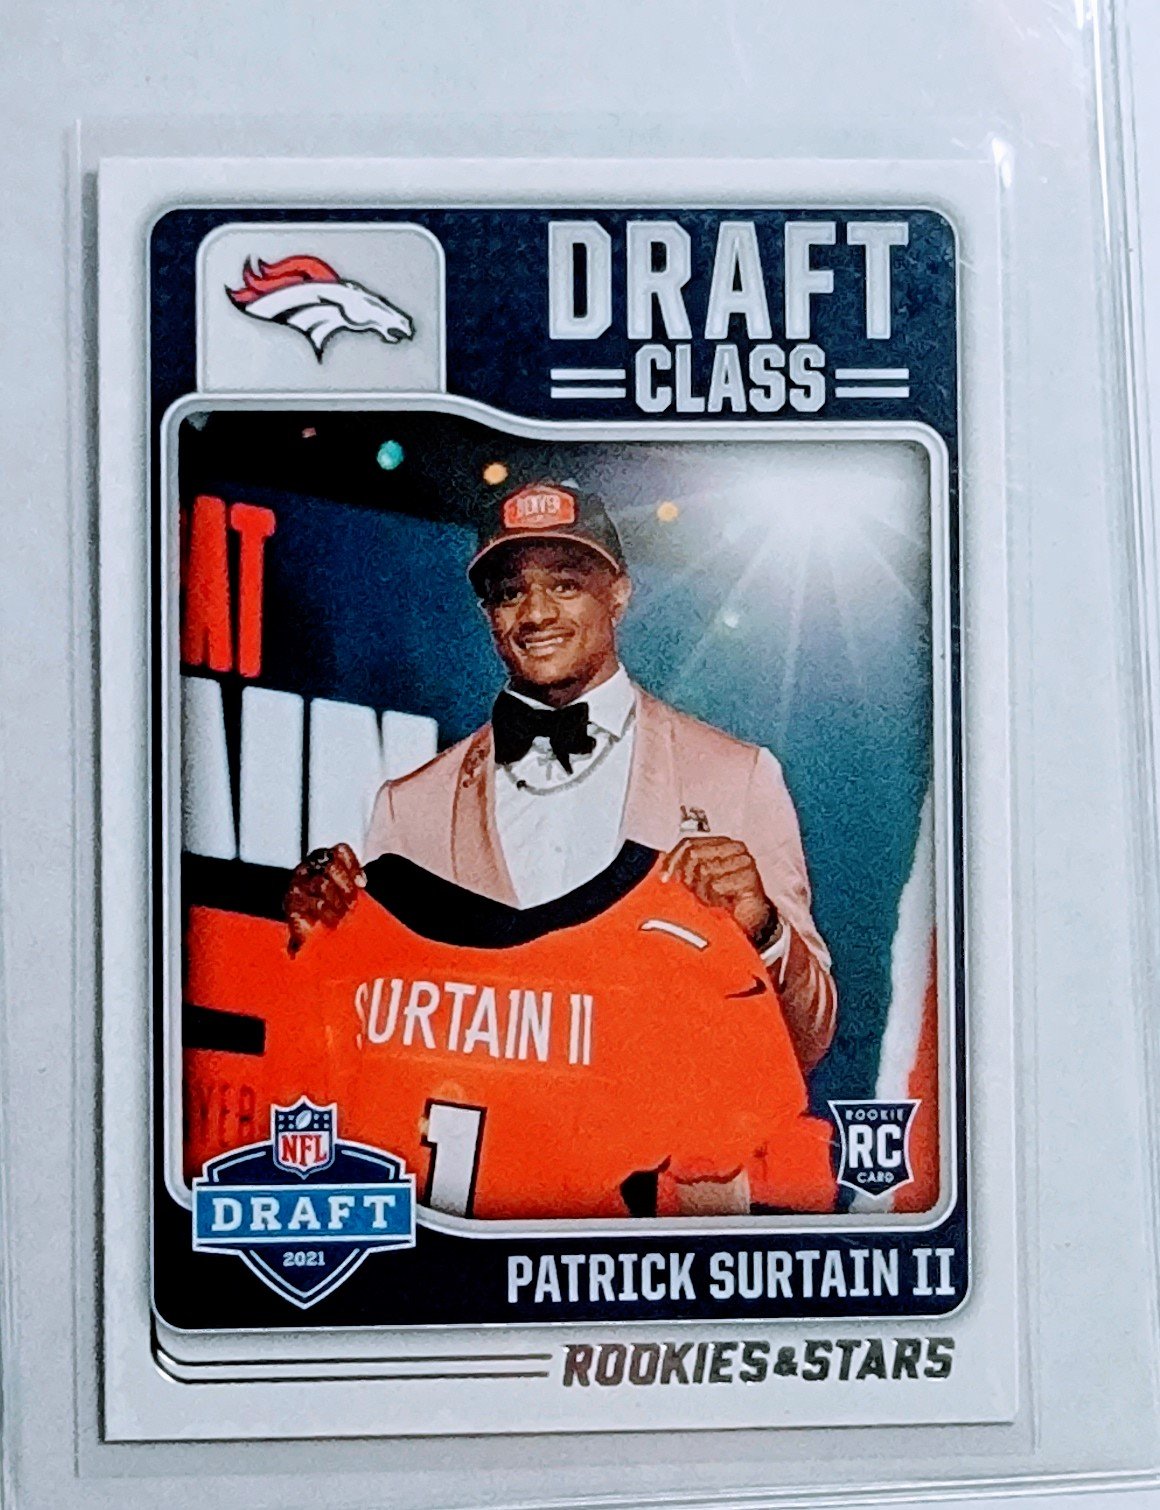 2021 Panini Rookies and Stars Patrick Surtain II Draft Class Rookie Football Card AVM1 simple Xclusive Collectibles   